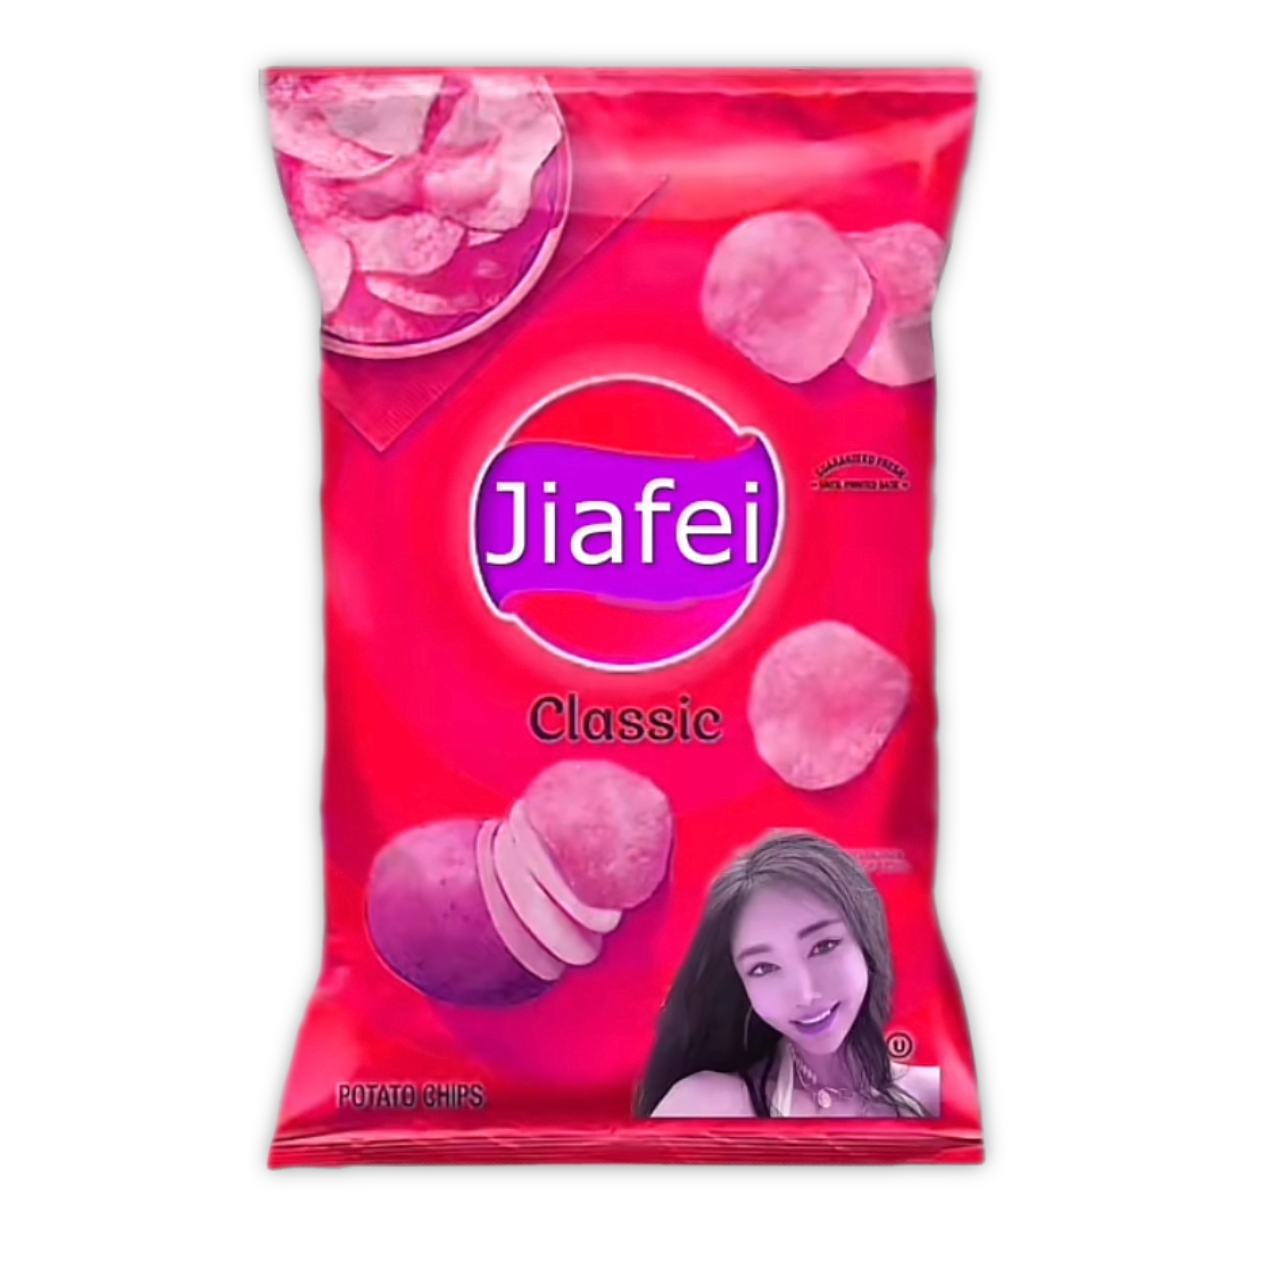 Jiafei Products 